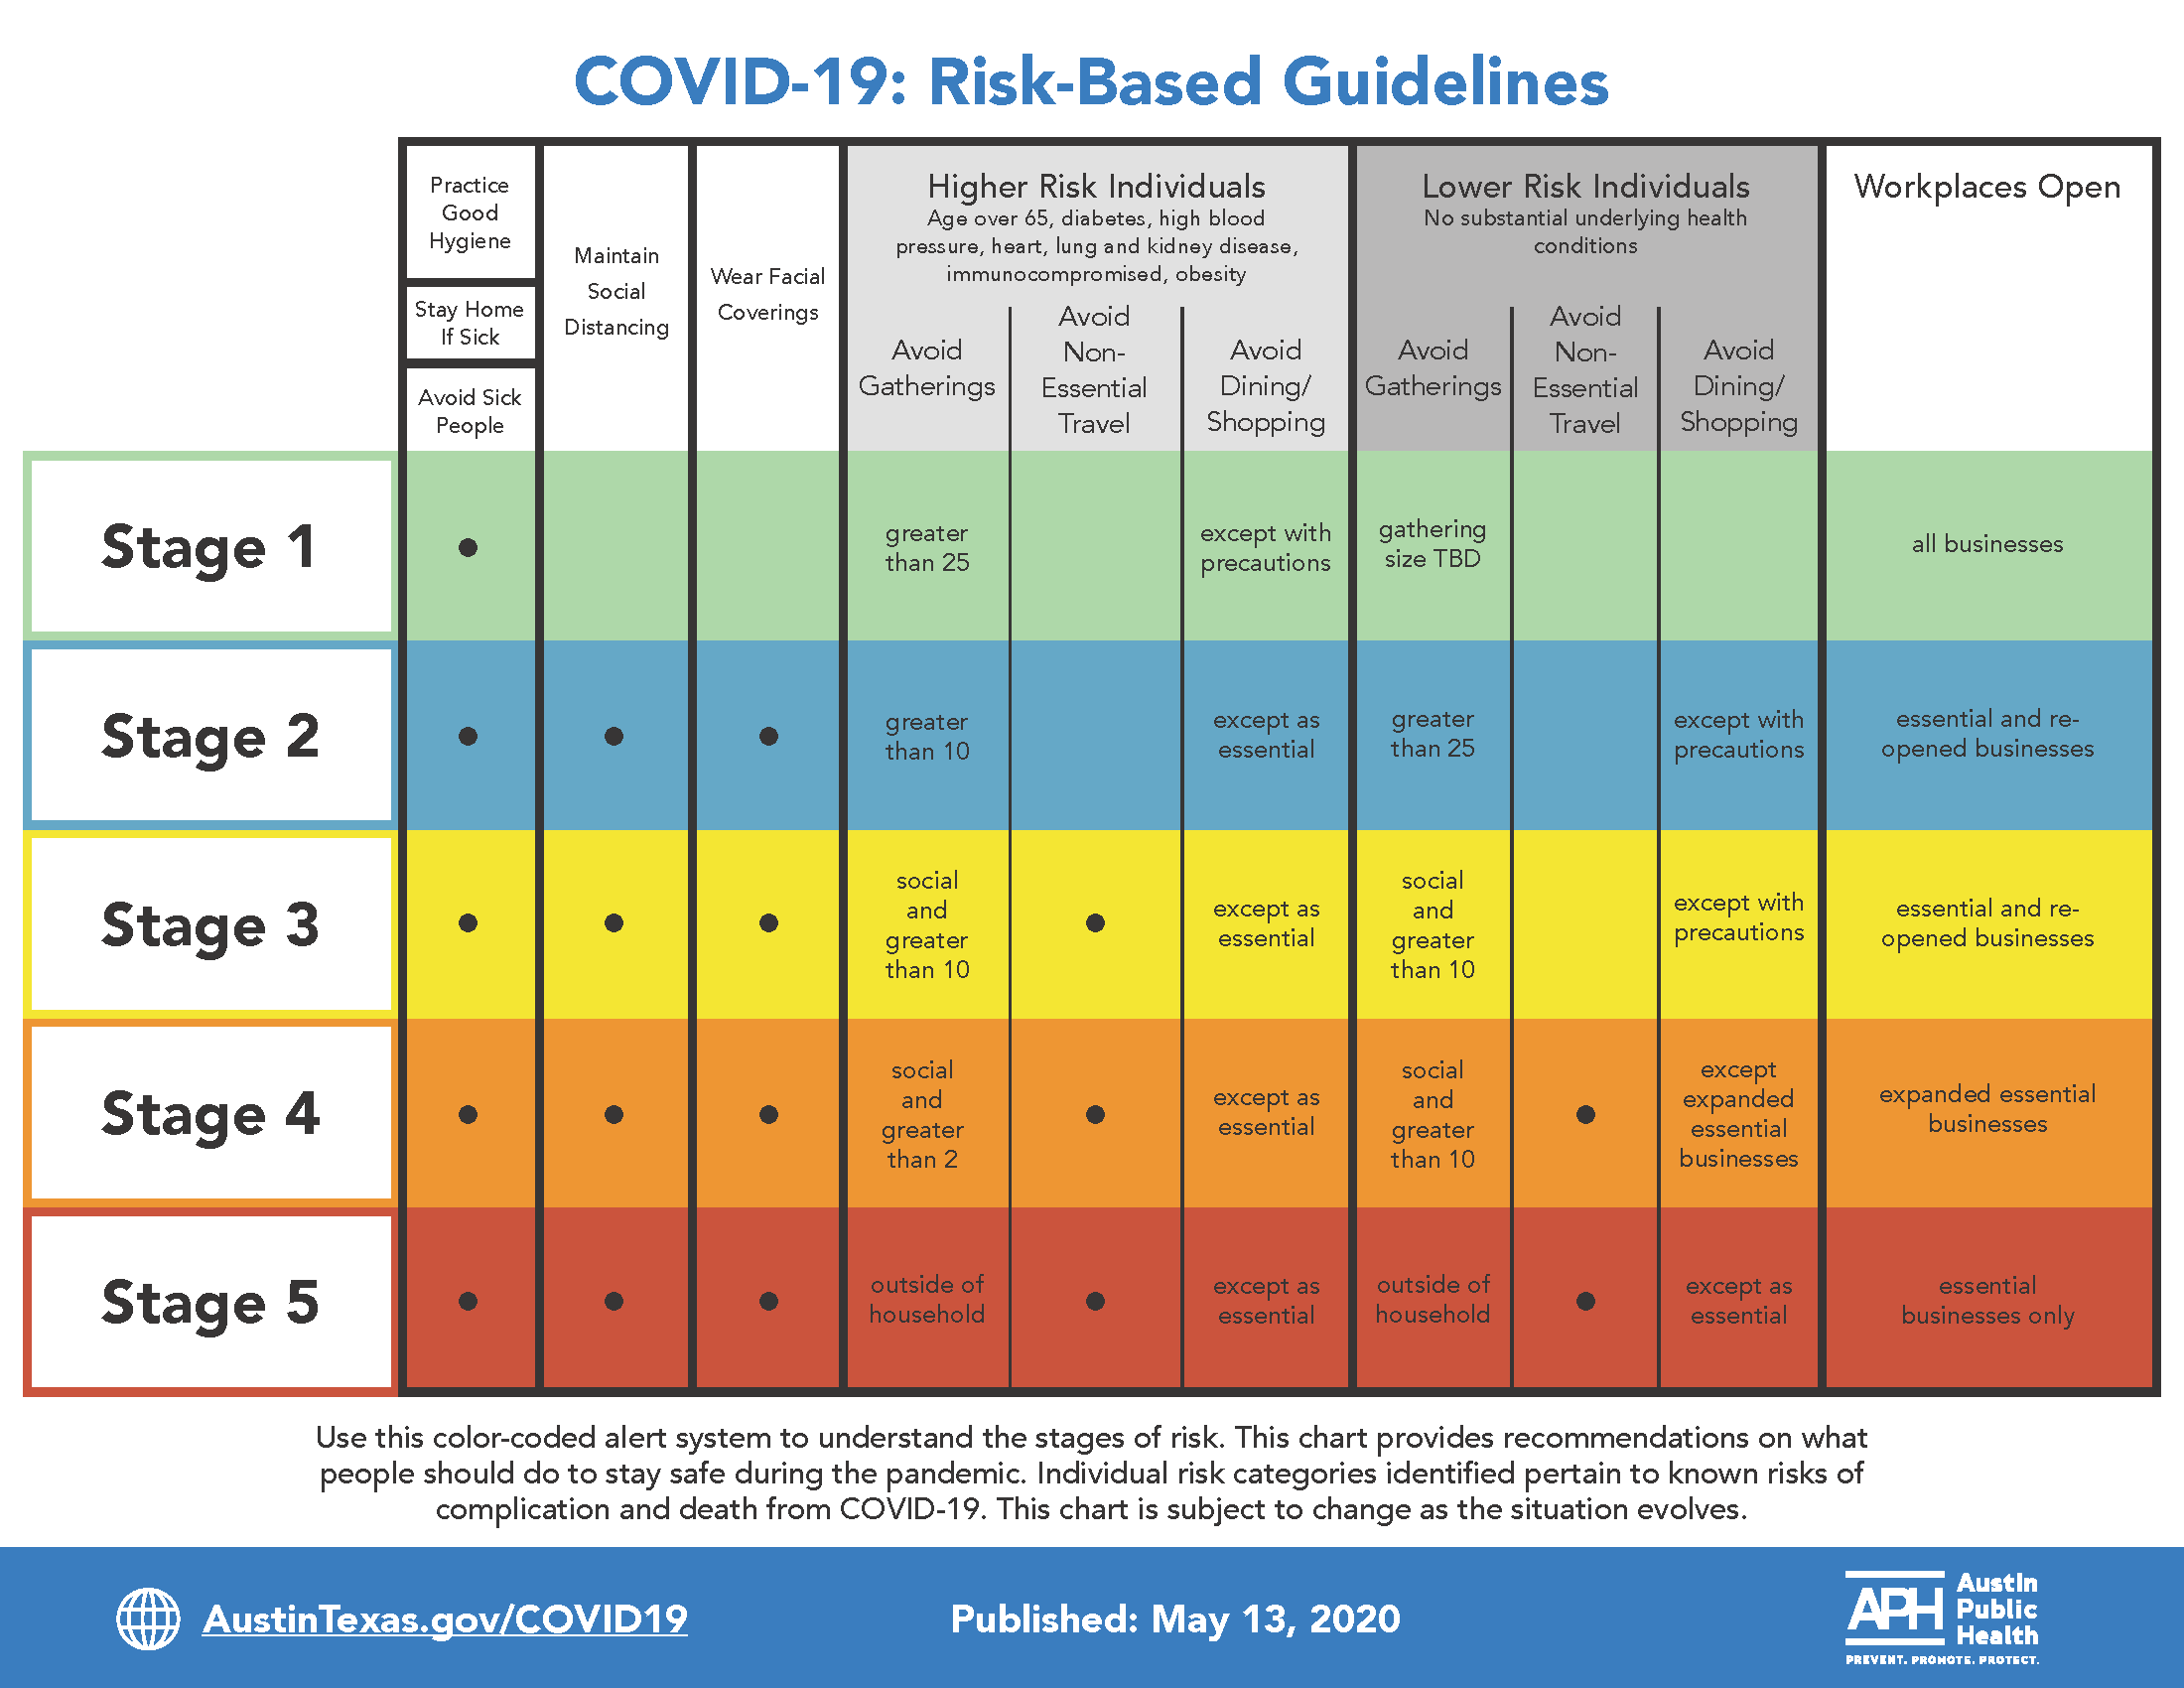 New RiskBased Guidelines to Help the Community Stay Safe During COVID